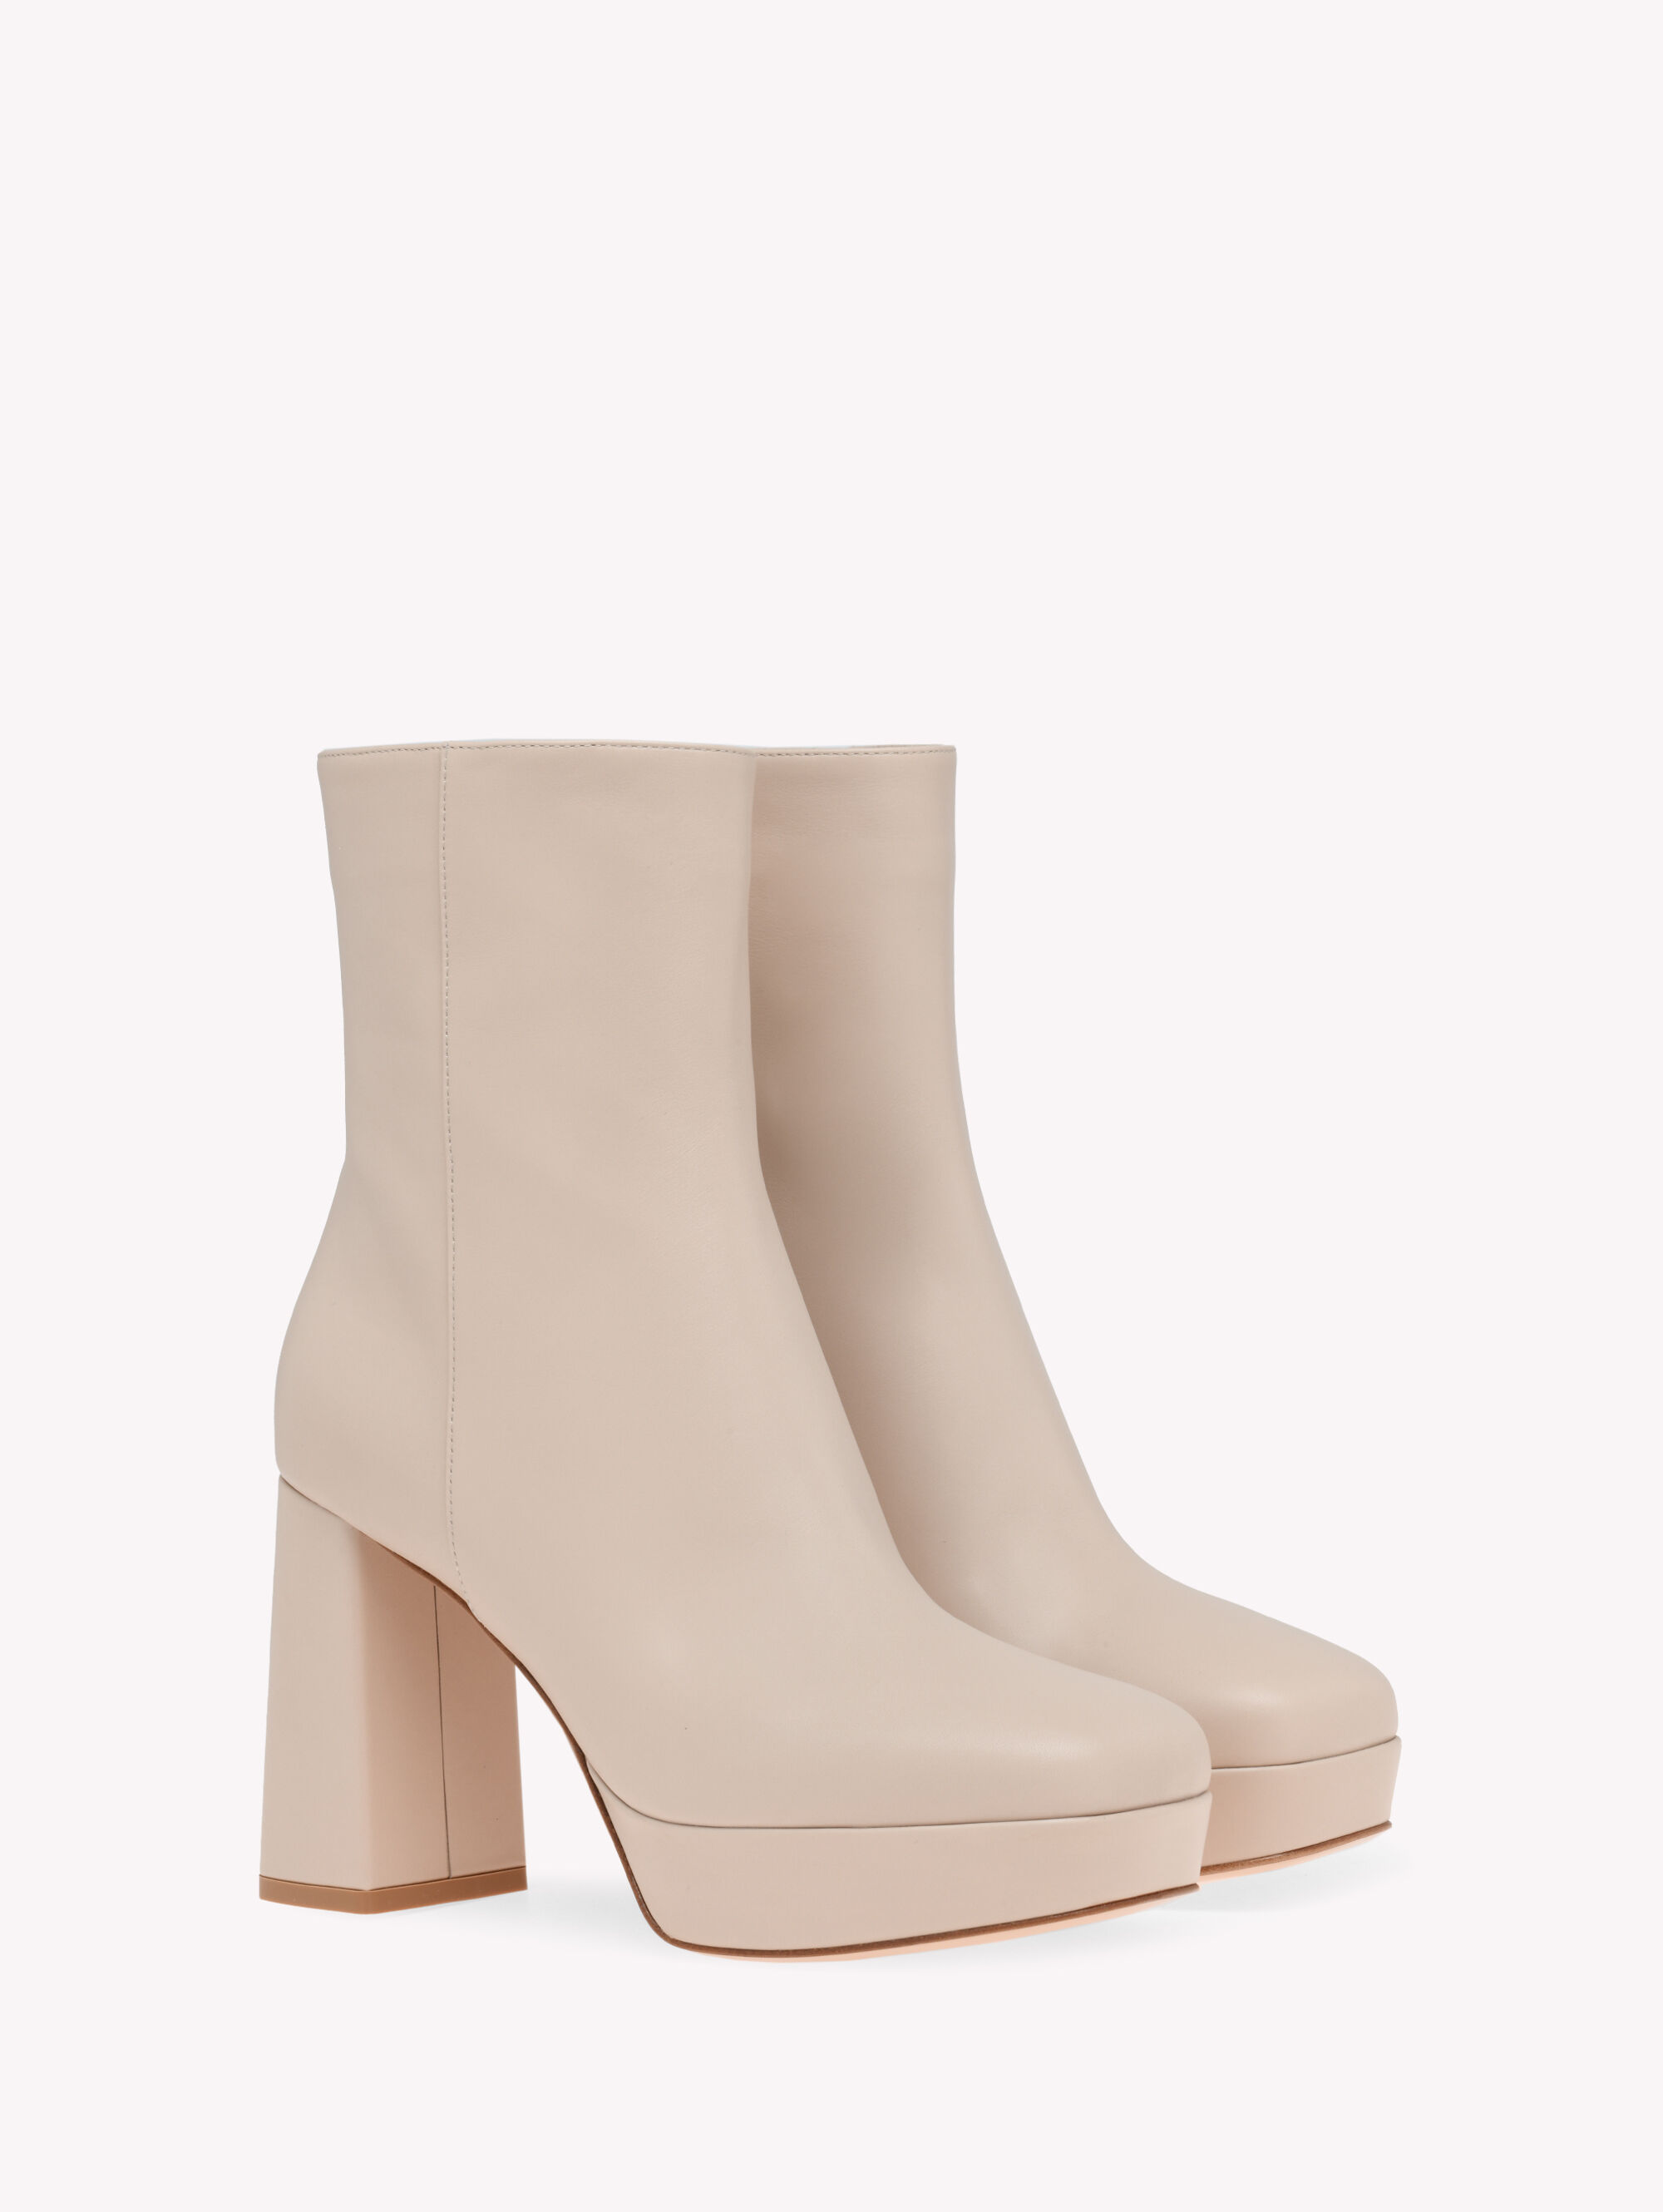 Ankle Boots for Women DAISEN | Gianvito Rossi